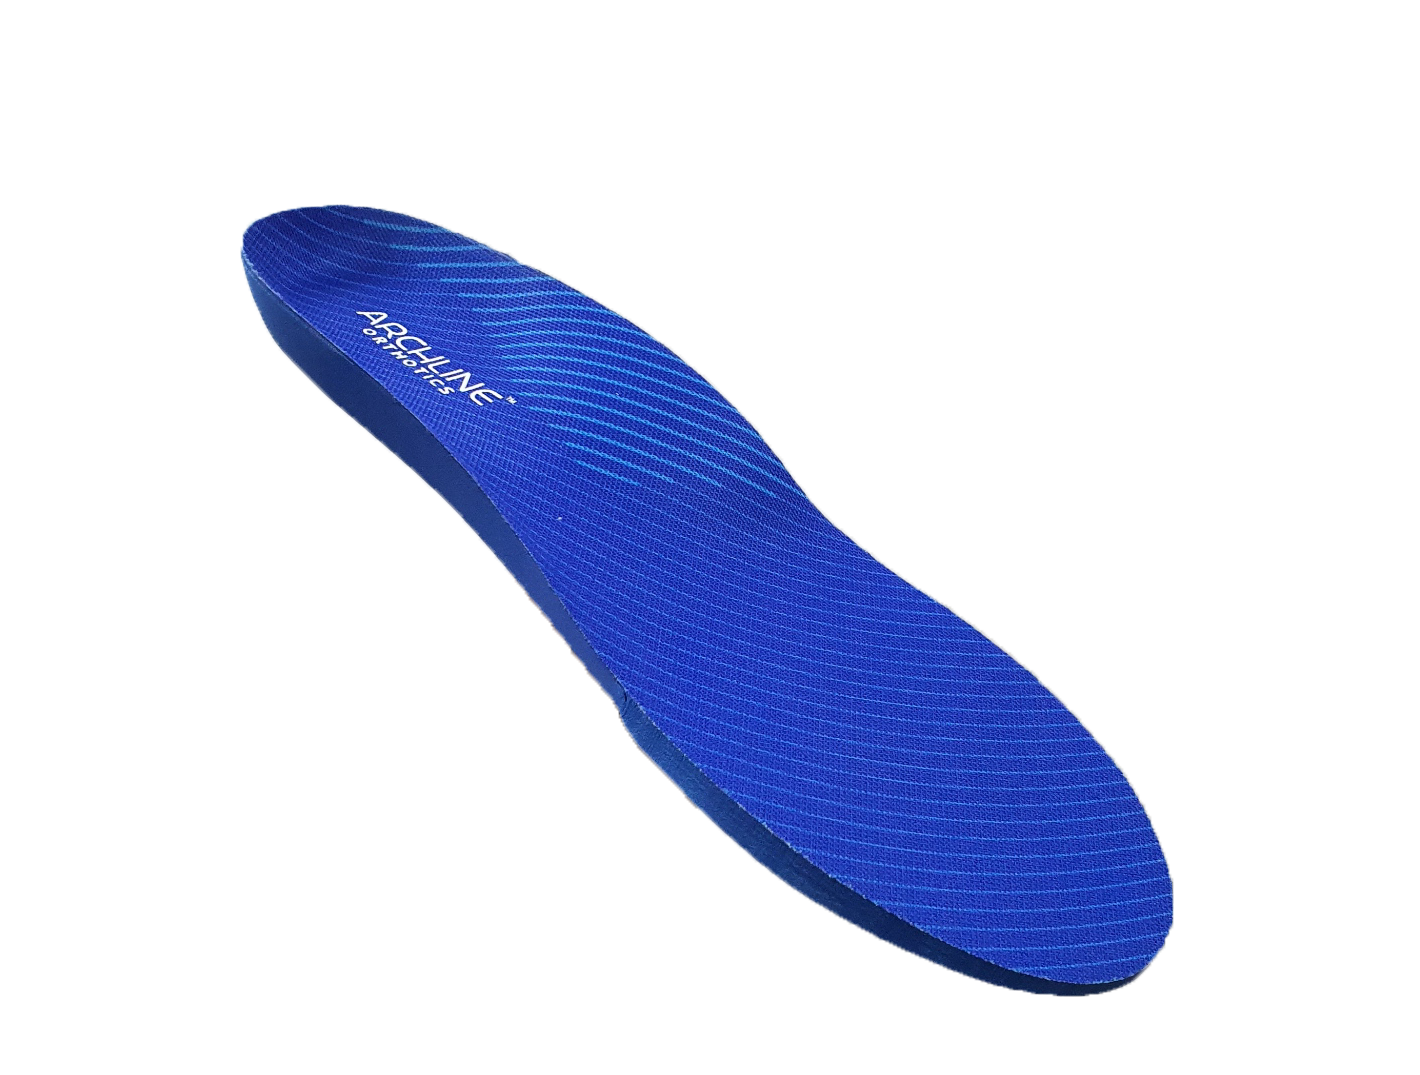 Archline Supination Orthotic Insoles - Full Length (Unisex) Plantar Fasciitis High Arch - Euro 37